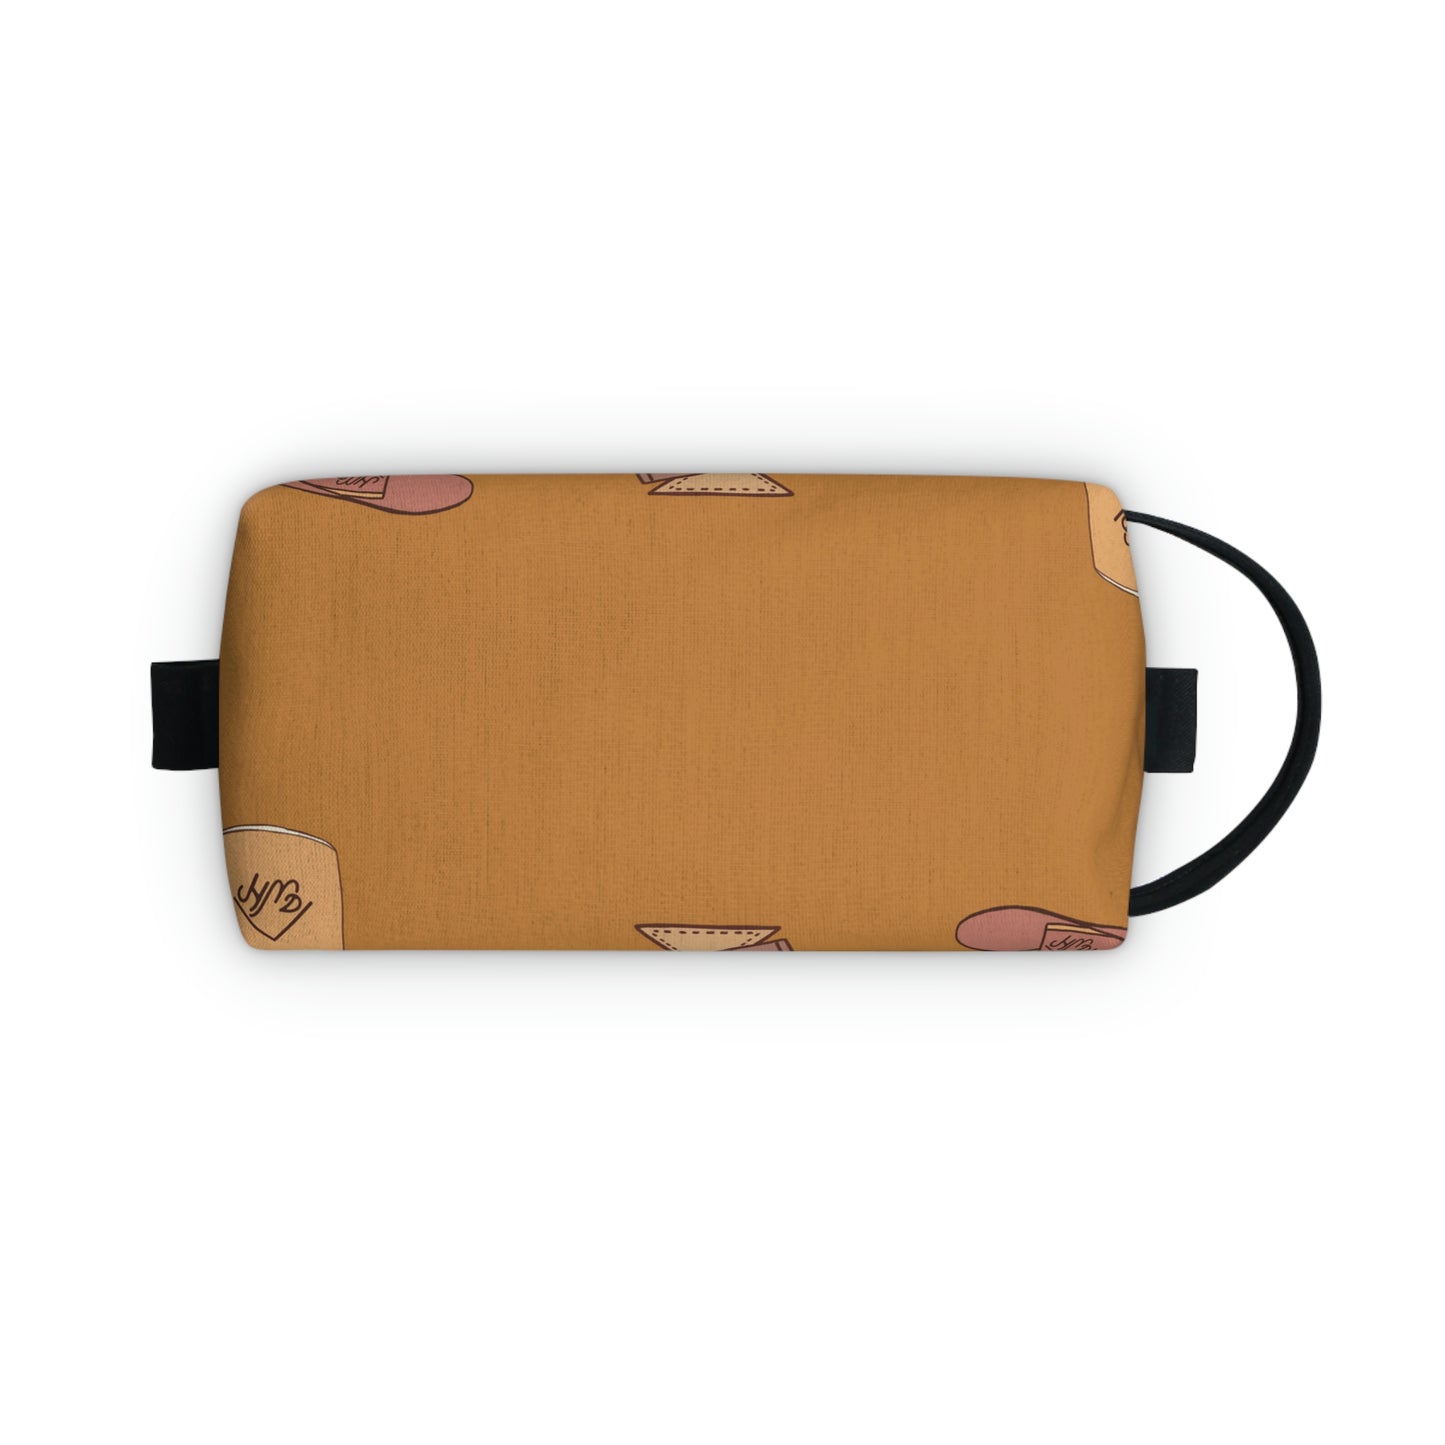 Western Office Supply House Toiletry Bag